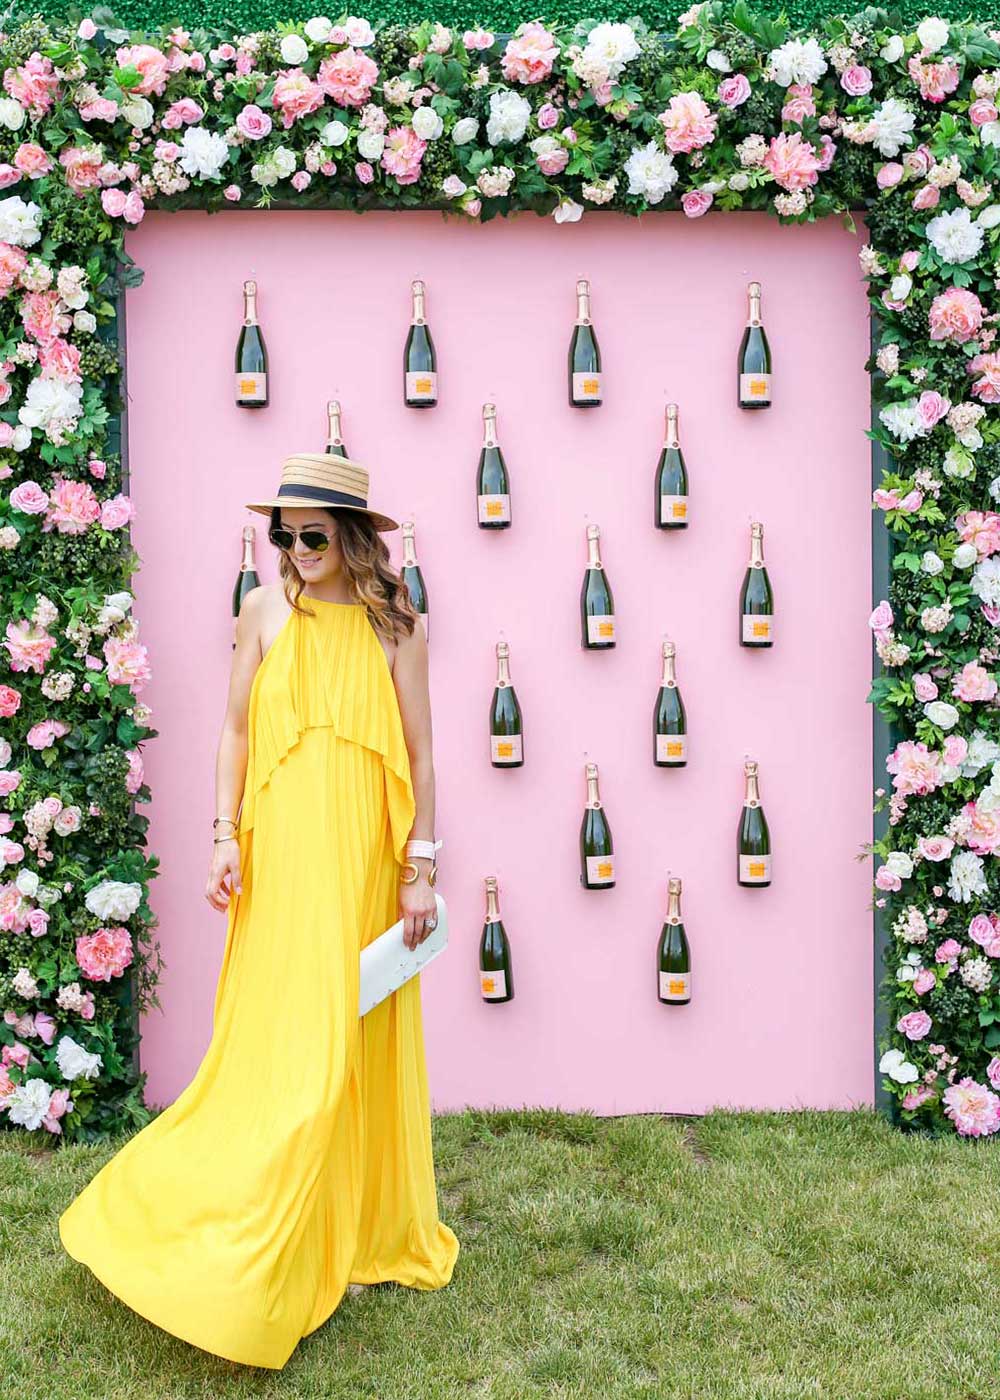 Veuve Clicquot Polo Classic held at Liberty State Park. Featuring